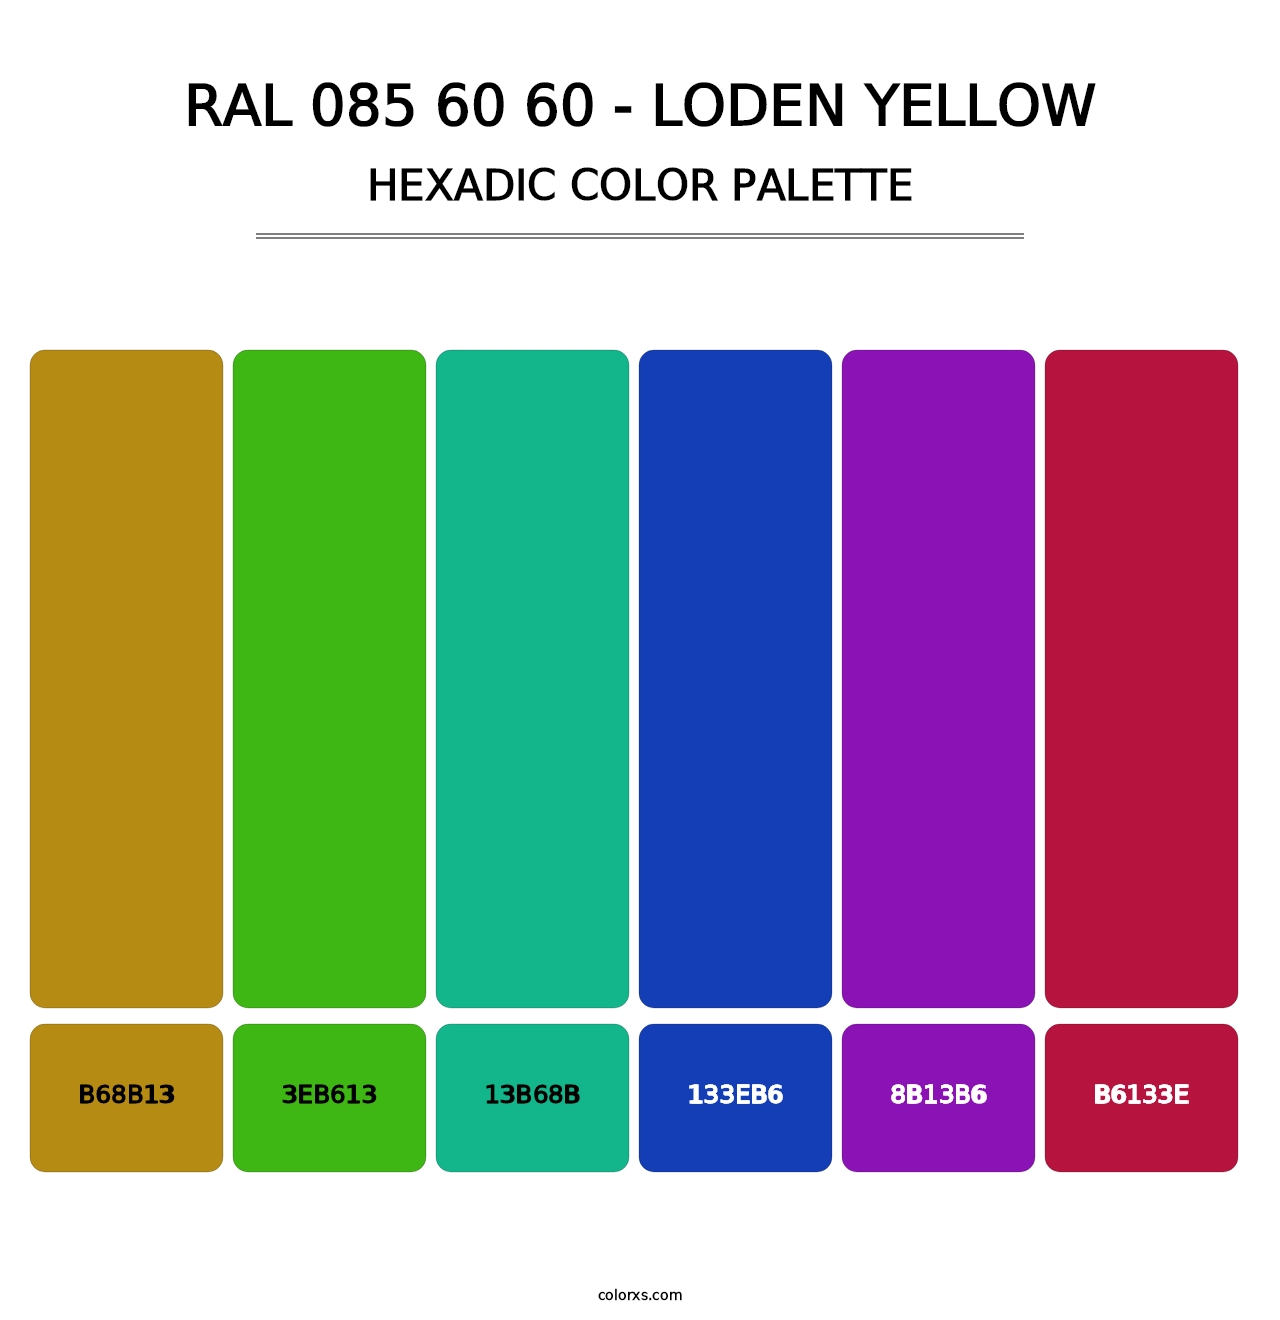 RAL 085 60 60 - Loden Yellow - Hexadic Color Palette